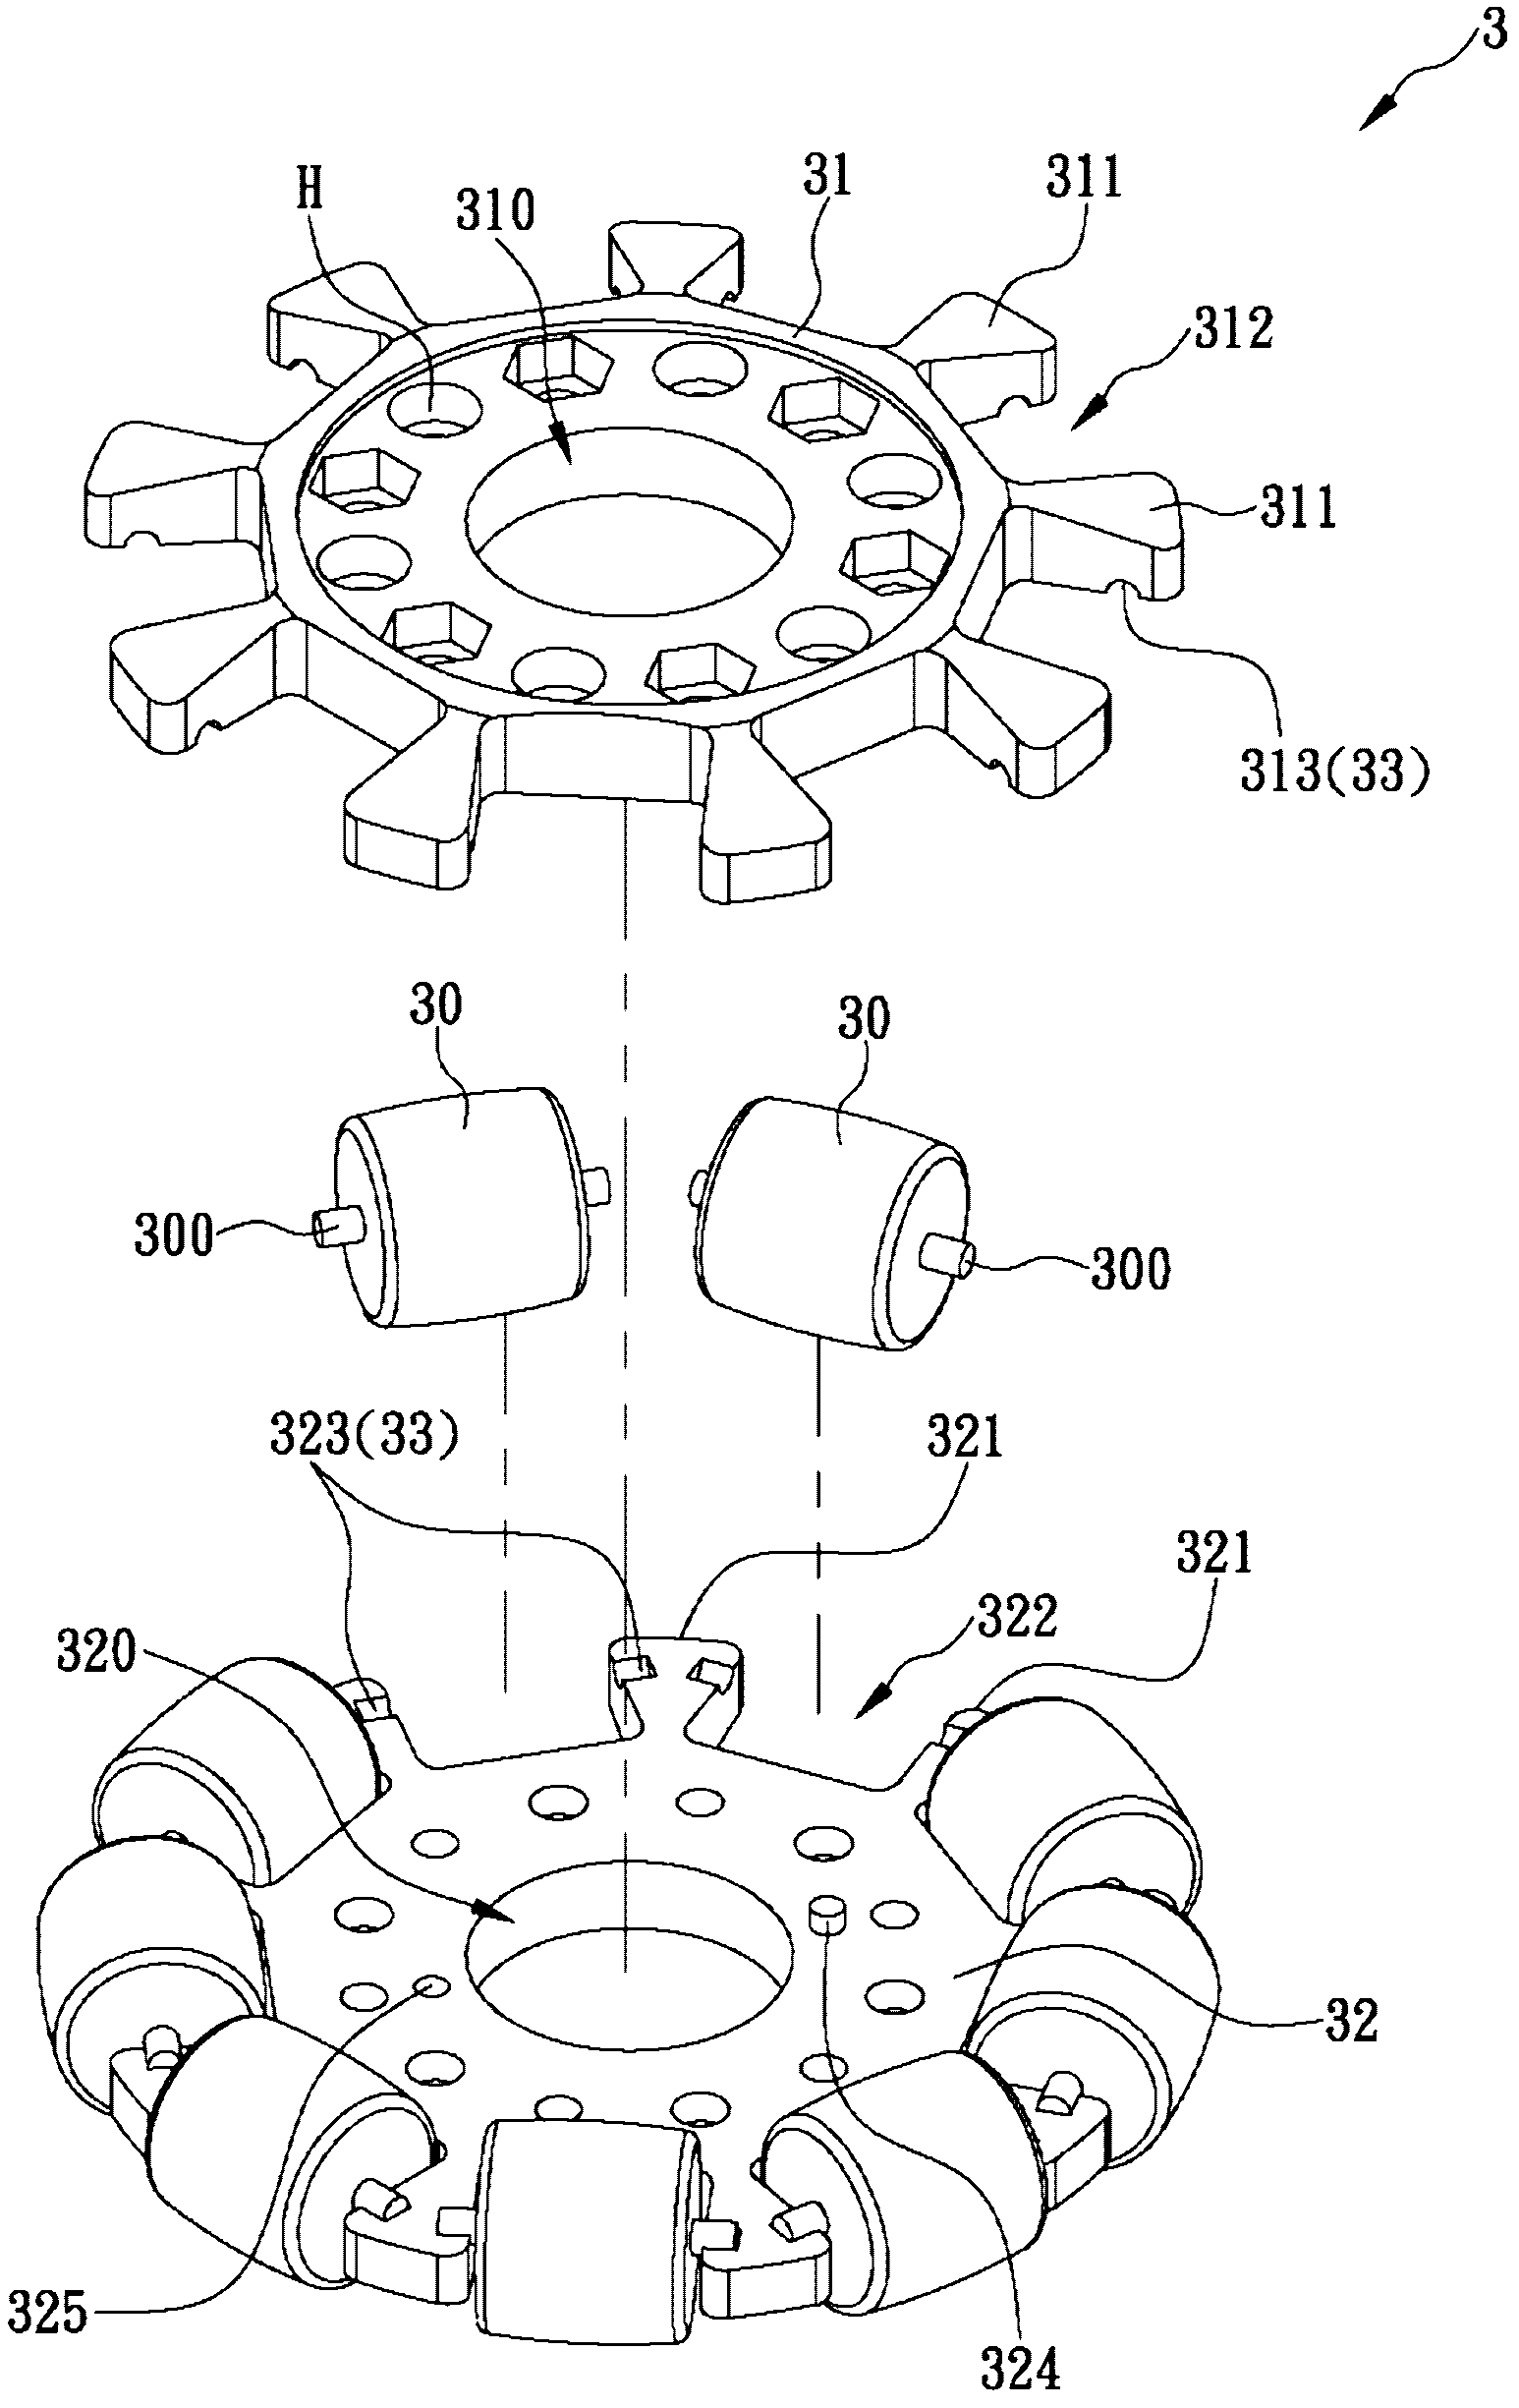 Universal wheel convenient to disassemble and assemble and universal wheel set